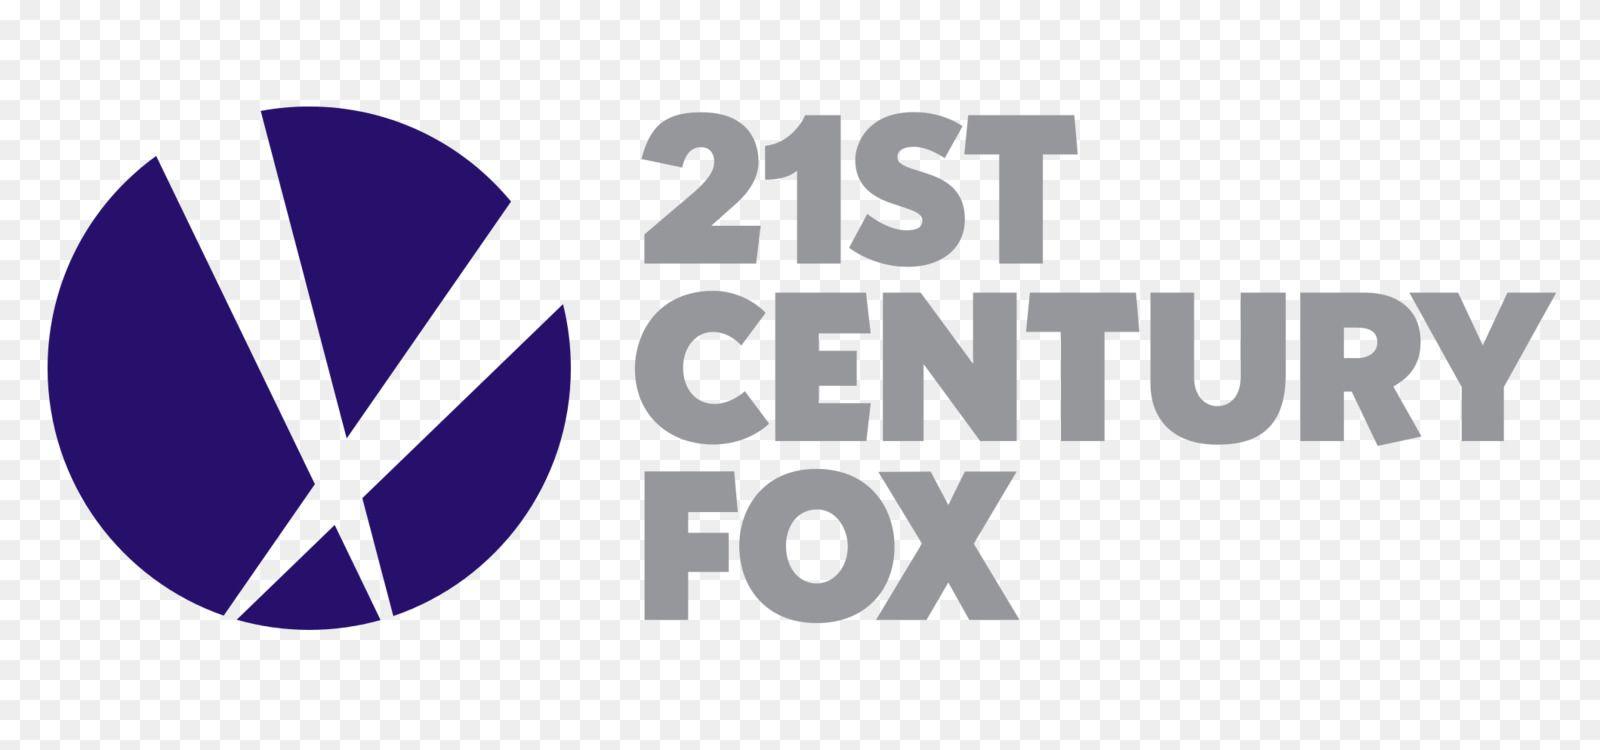 Acquisition Logo - Proposed acquisition of 21st Century Fox by Disney Fox Networks